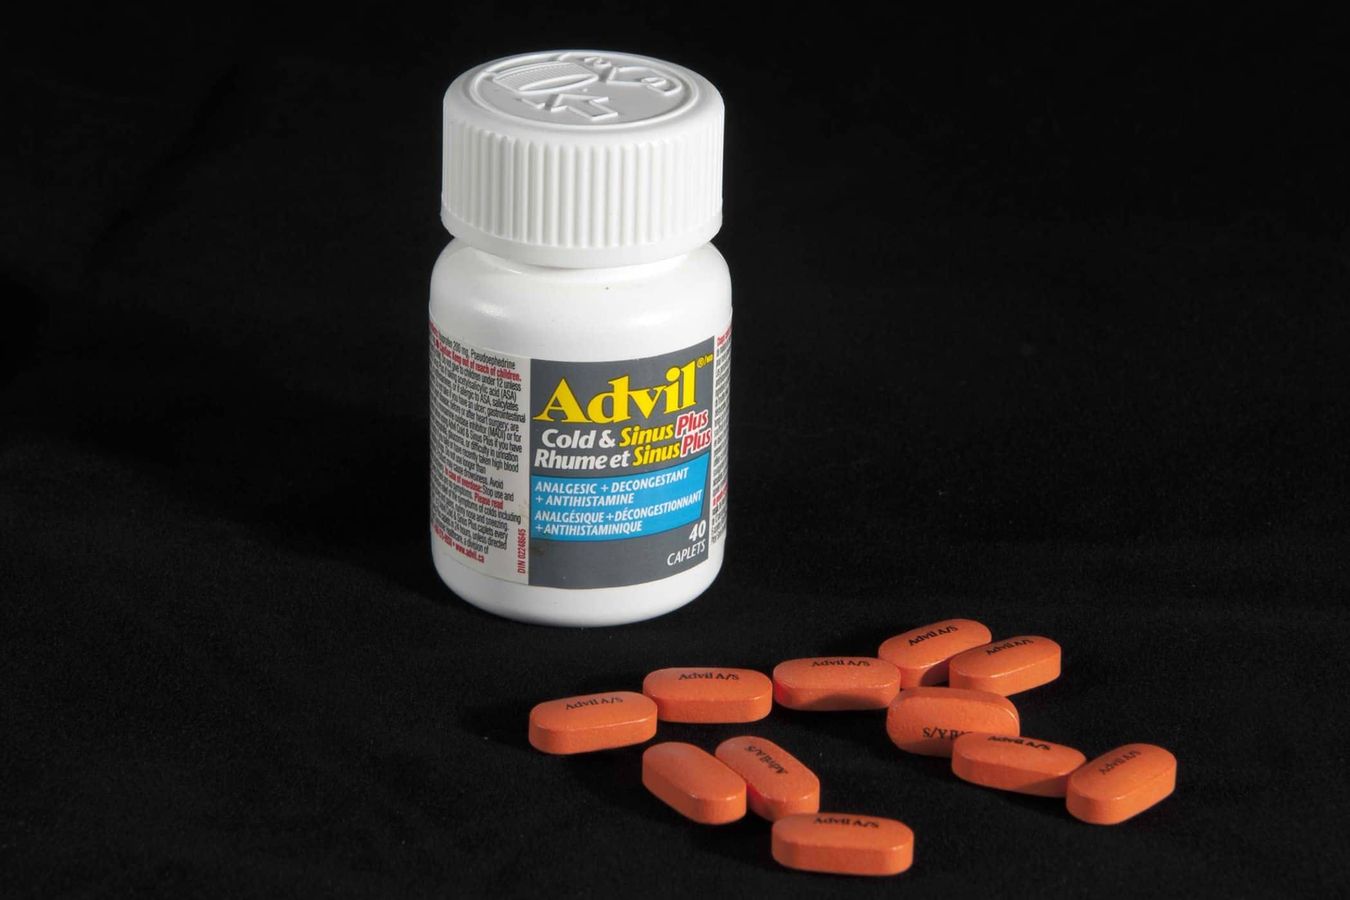 Know Whether To Take Tylenol Or Advil